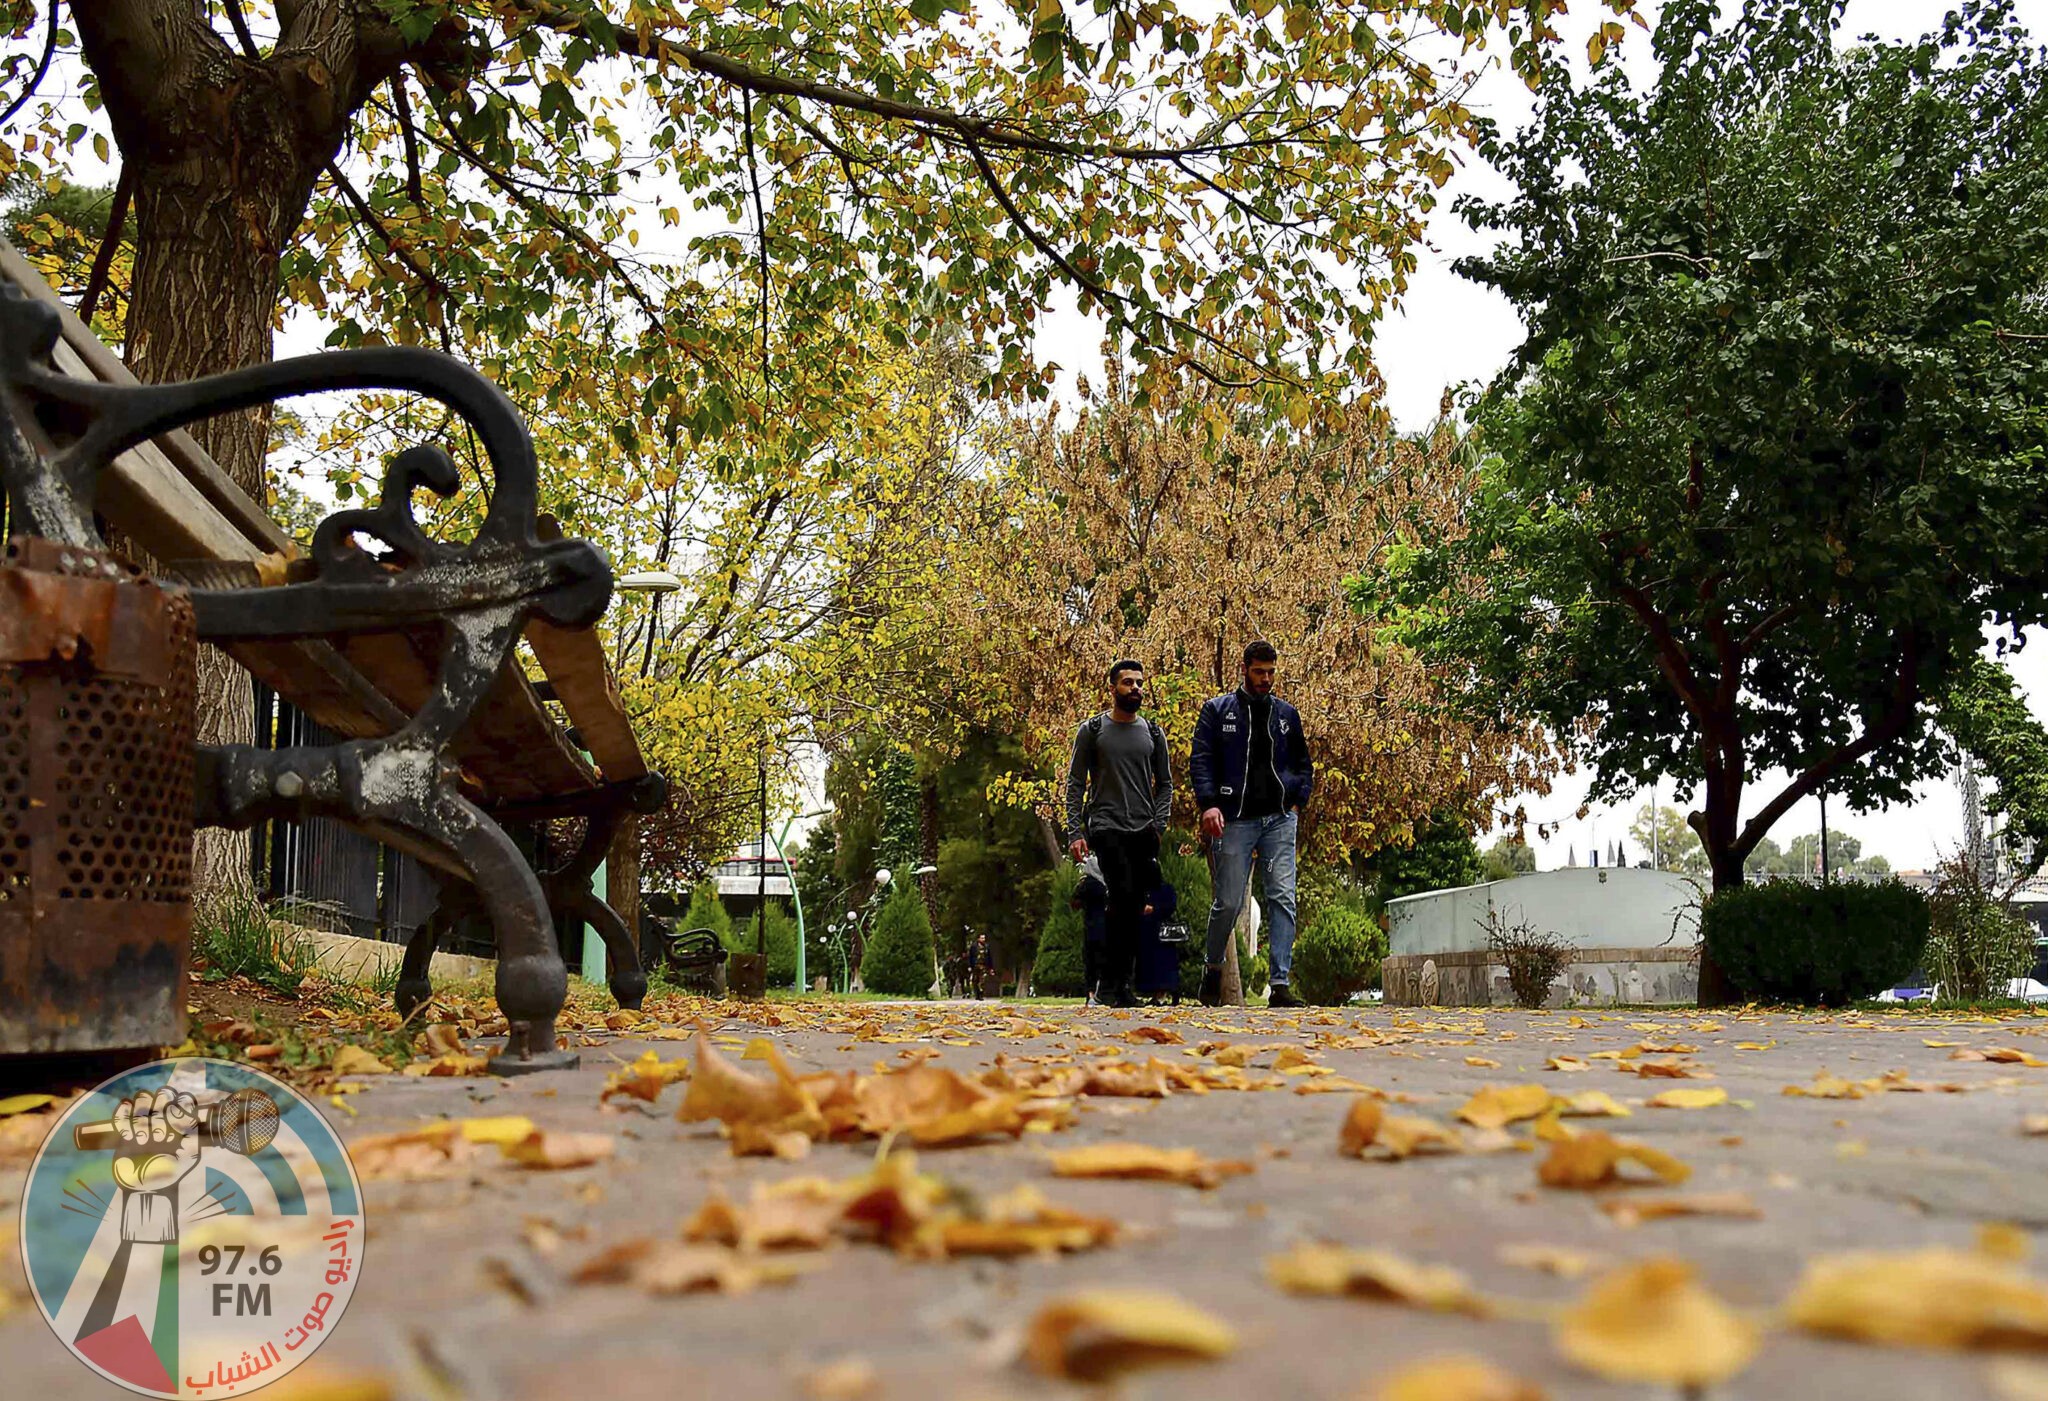 (211115) -- DAMASCUS, Nov. 15, 2021 (Xinhua) -- The autumn scenery is pictured in Damascus, Syria, Nov. 14, 2021. (Photo by Ammar Safarjalani/Xinhua)